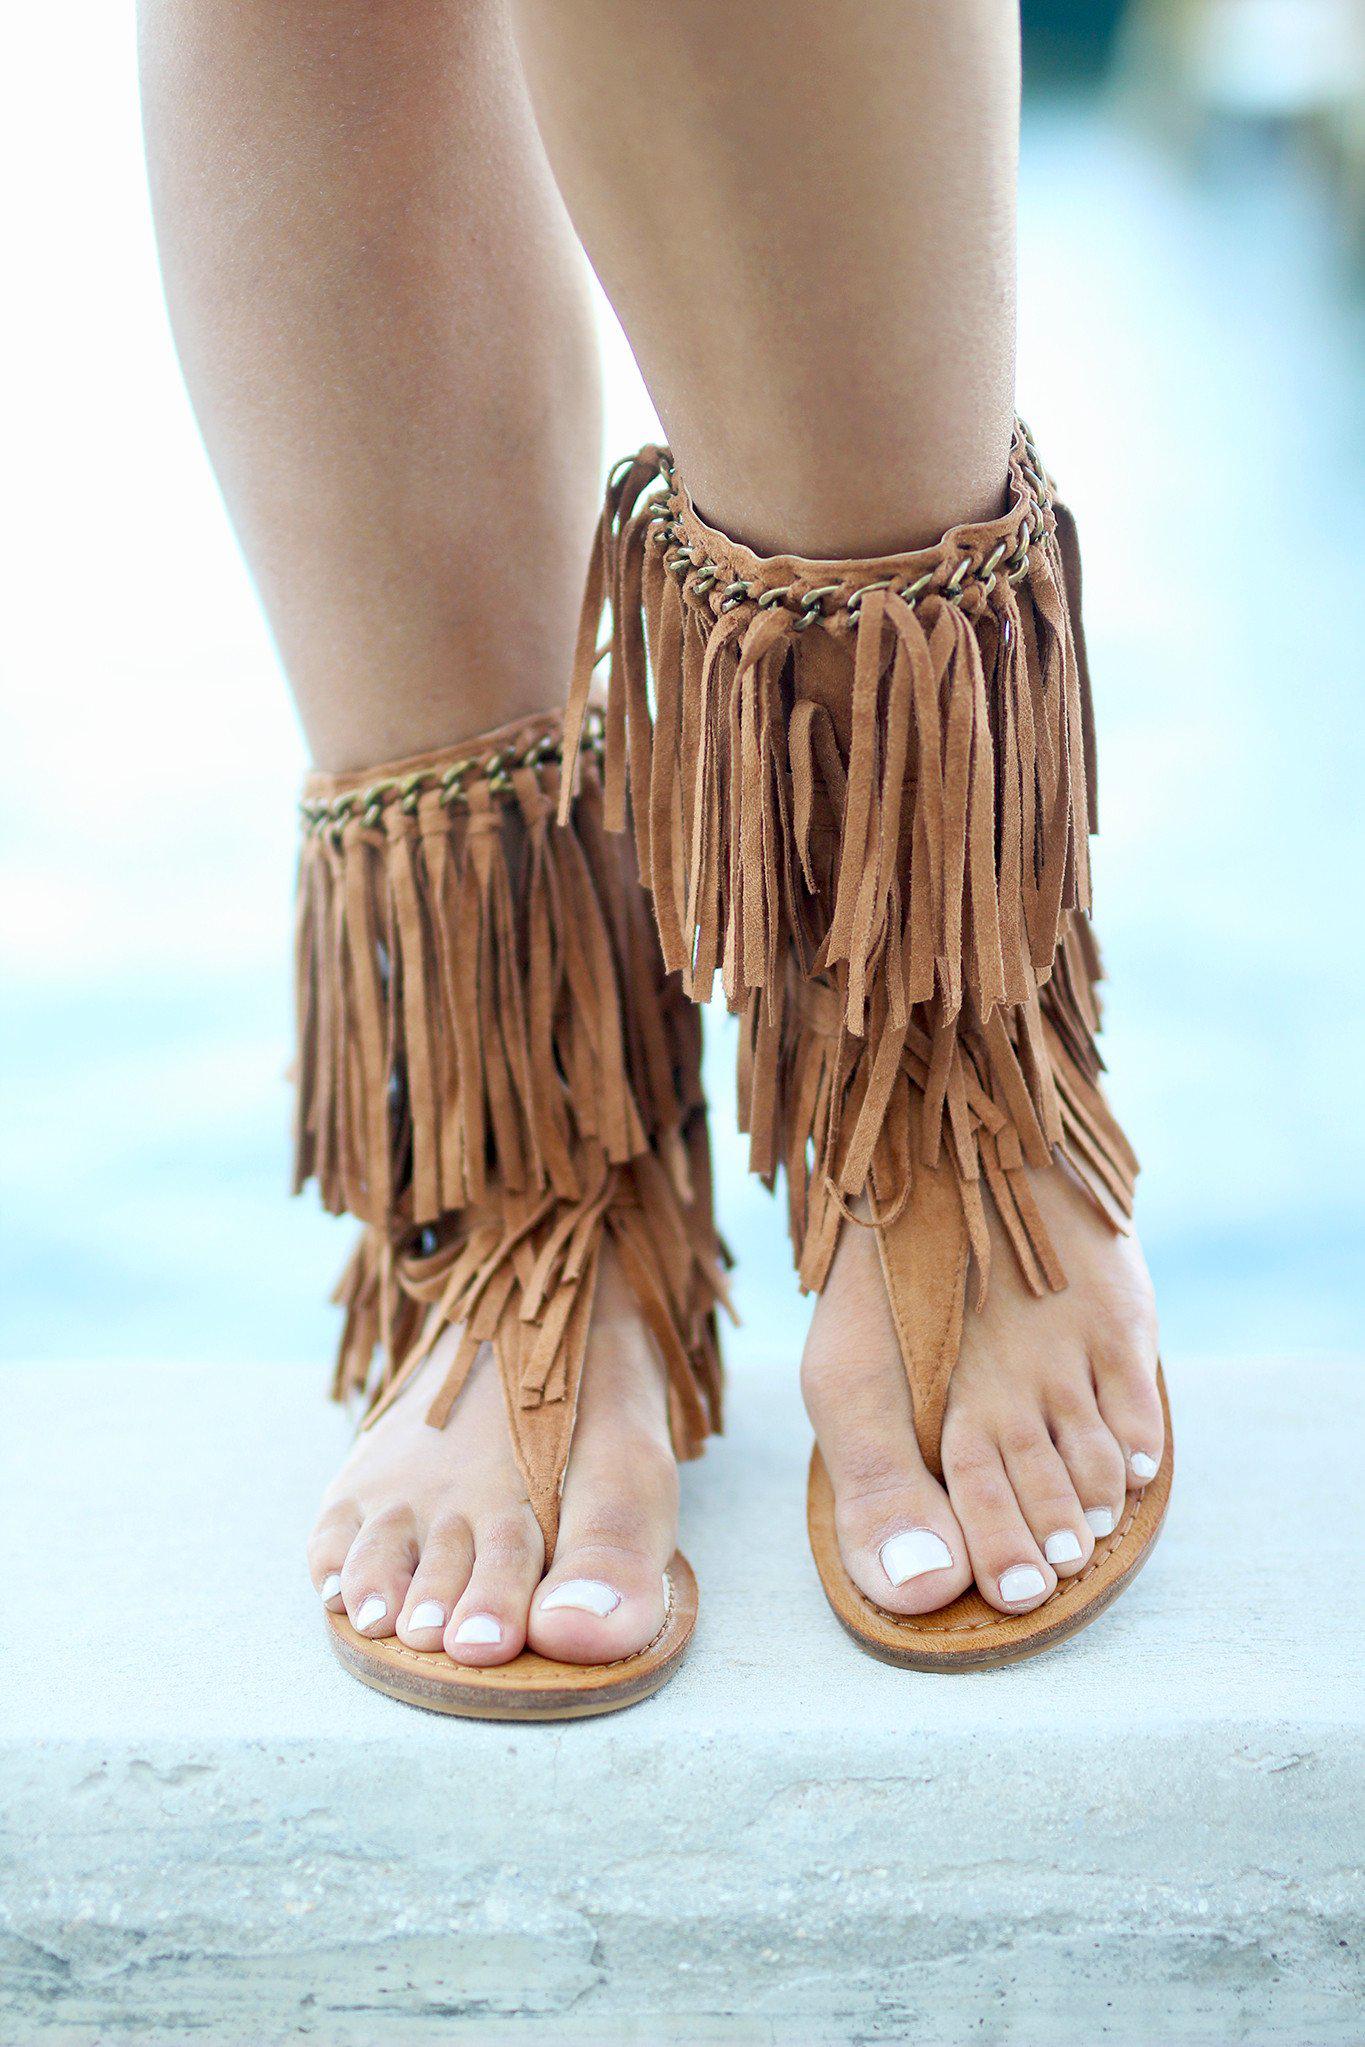 Namaste Tan Sandals – Saved by the Dress